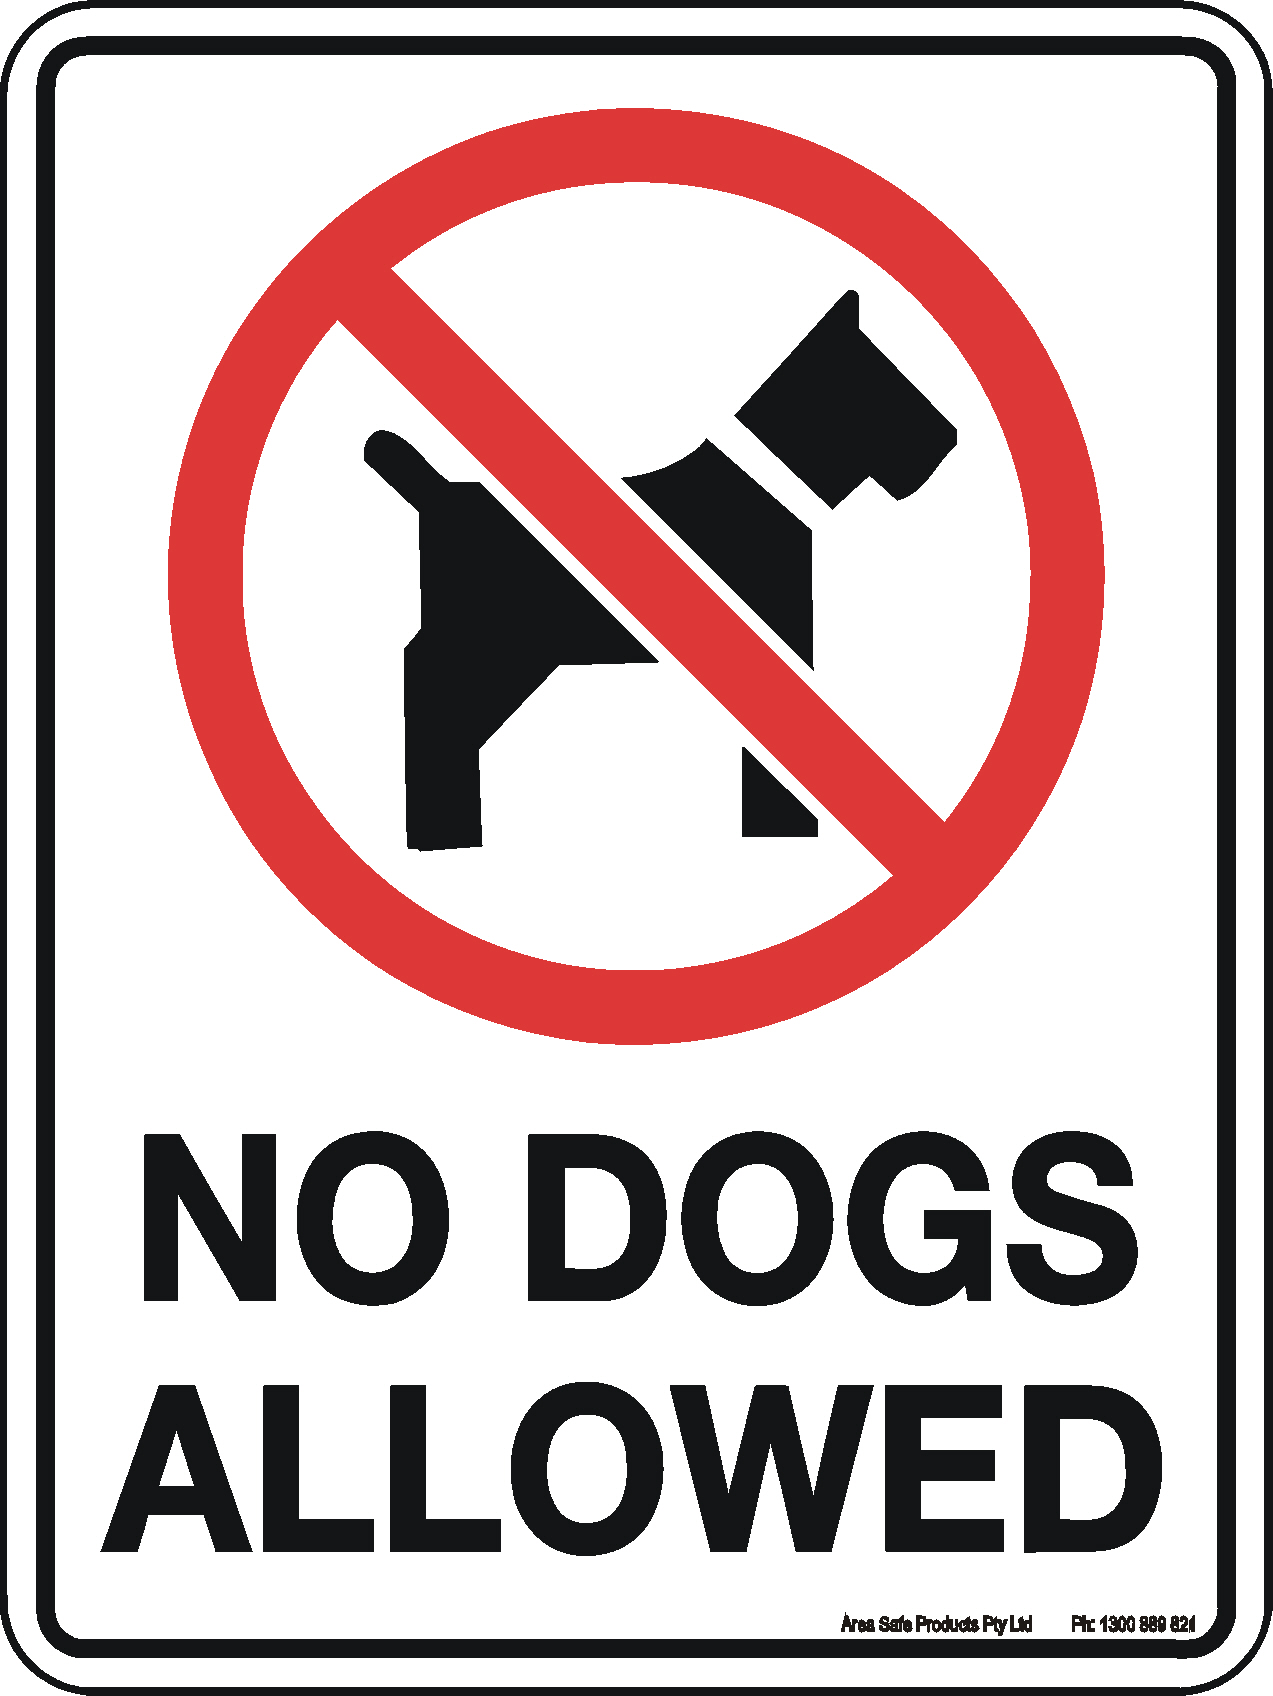 Dogs allowed. No Dogs allowed. No Dogs allowed sign. Dogs not allowed знак. Знак Russians and Dogs are not allowed.